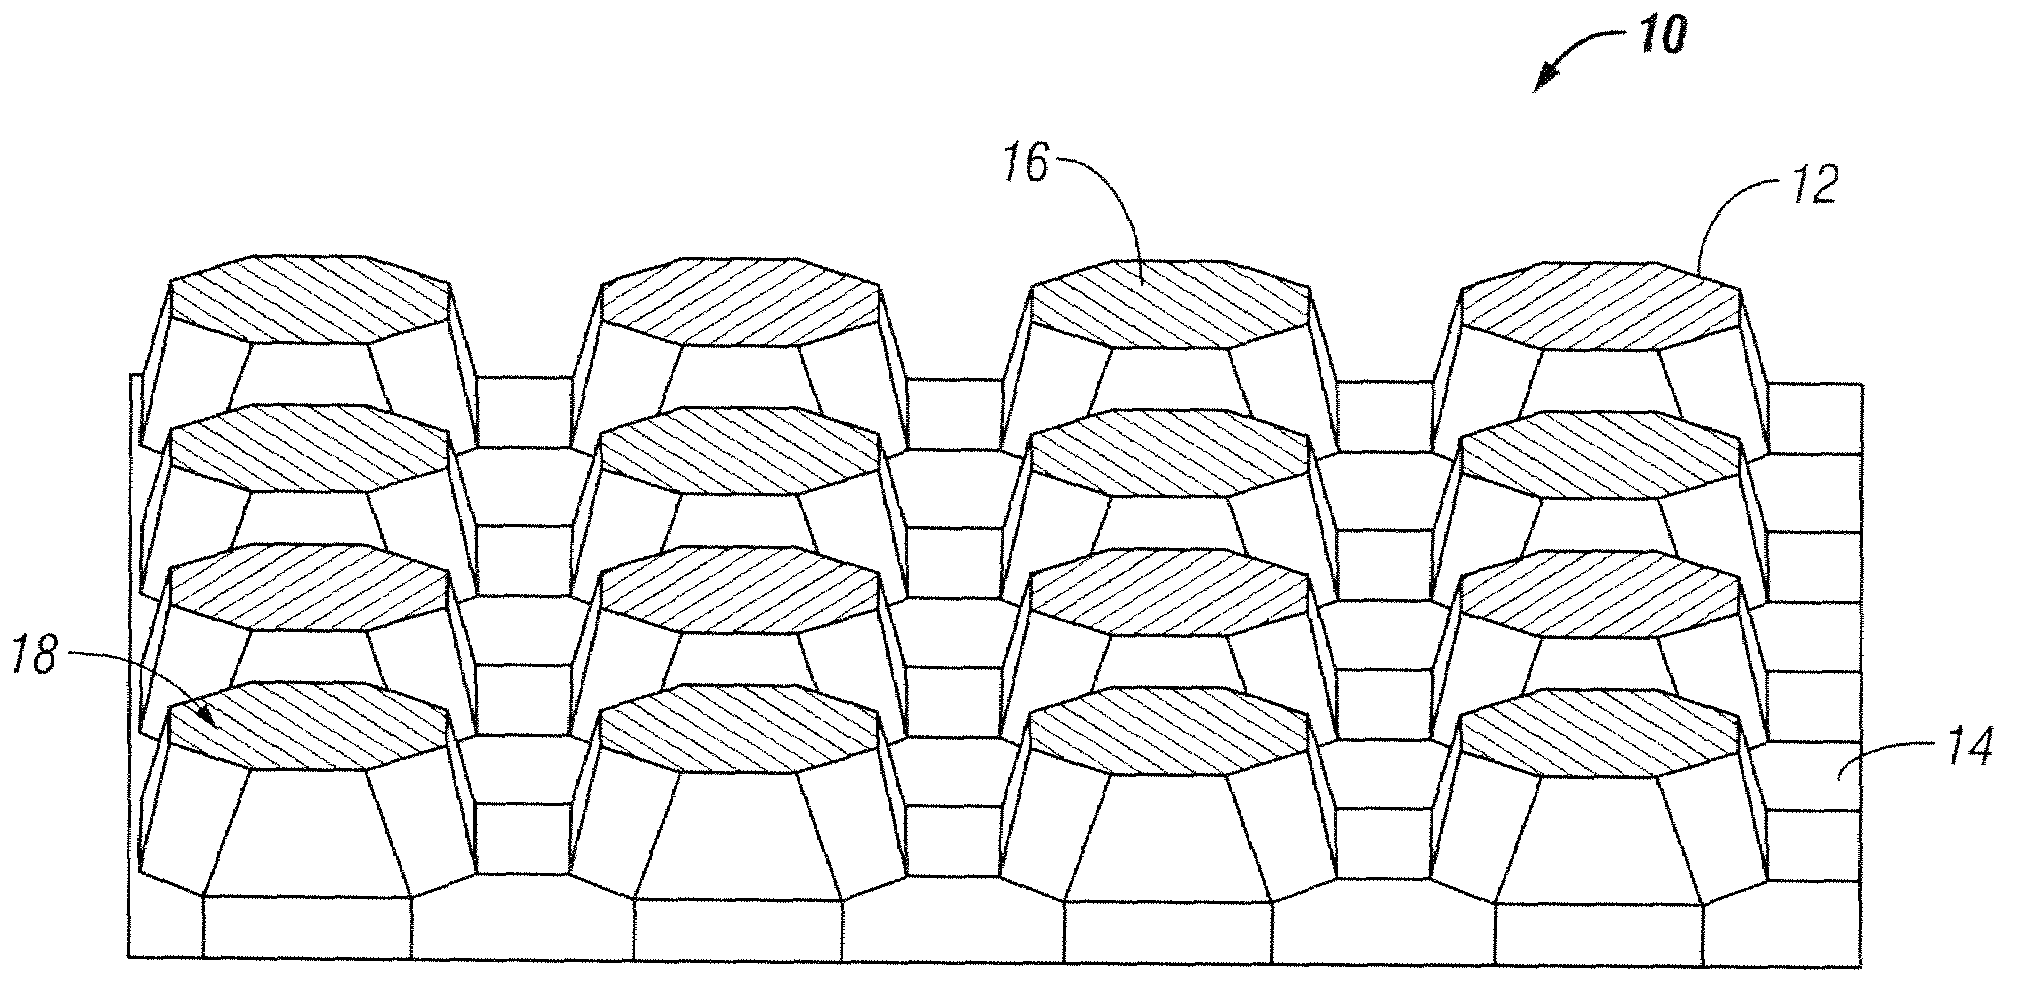 Formed metal core sandwich structure and method and system for making same